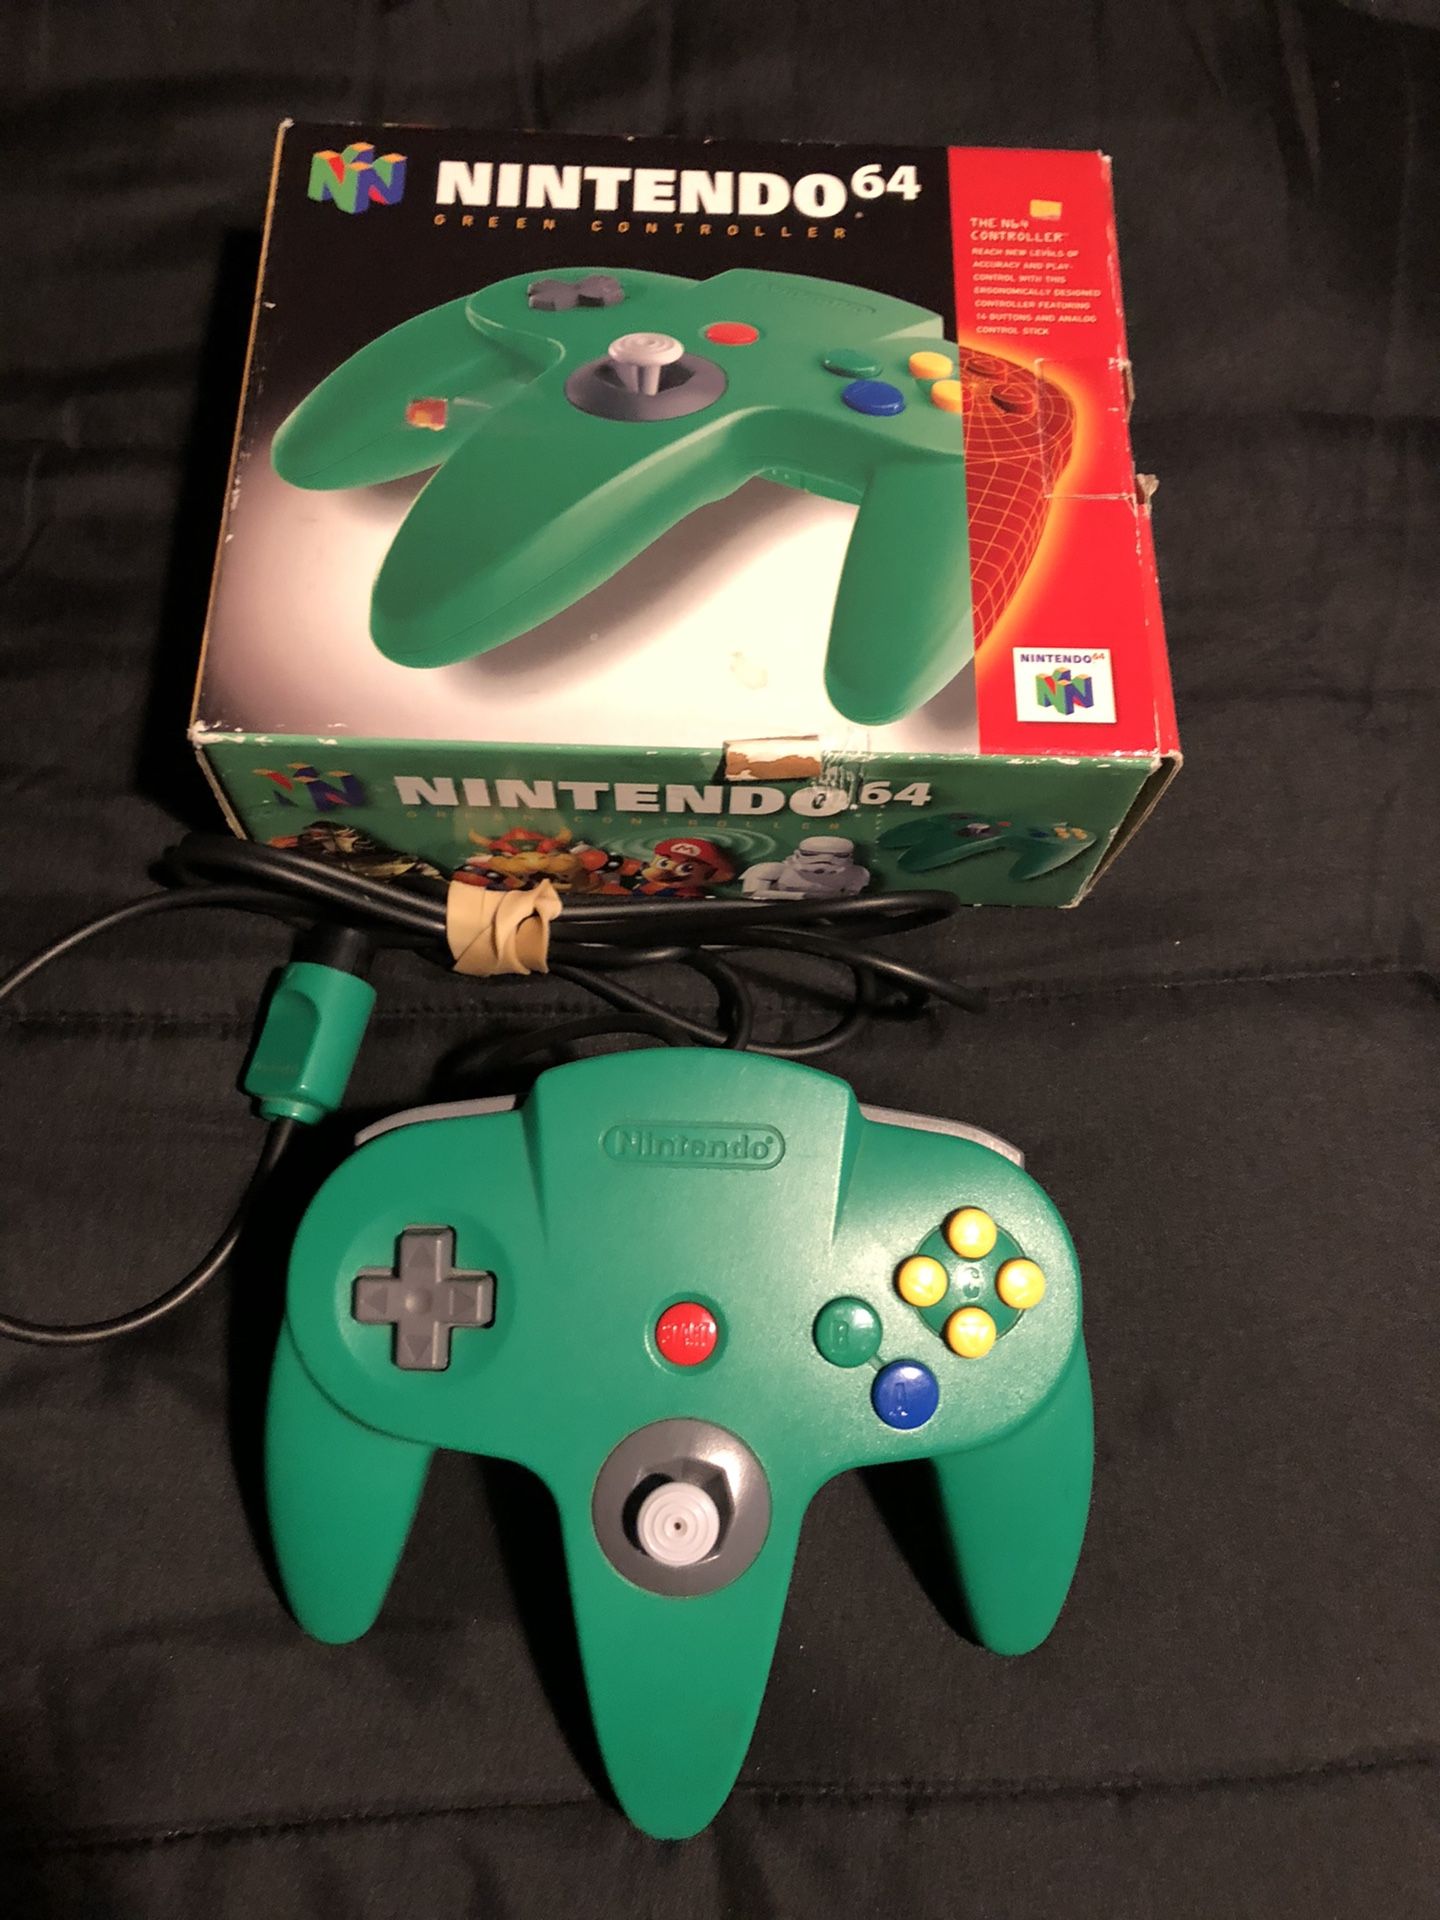 One Authentic Green N64 Controller with Just the Box for Nintendo 64 N64